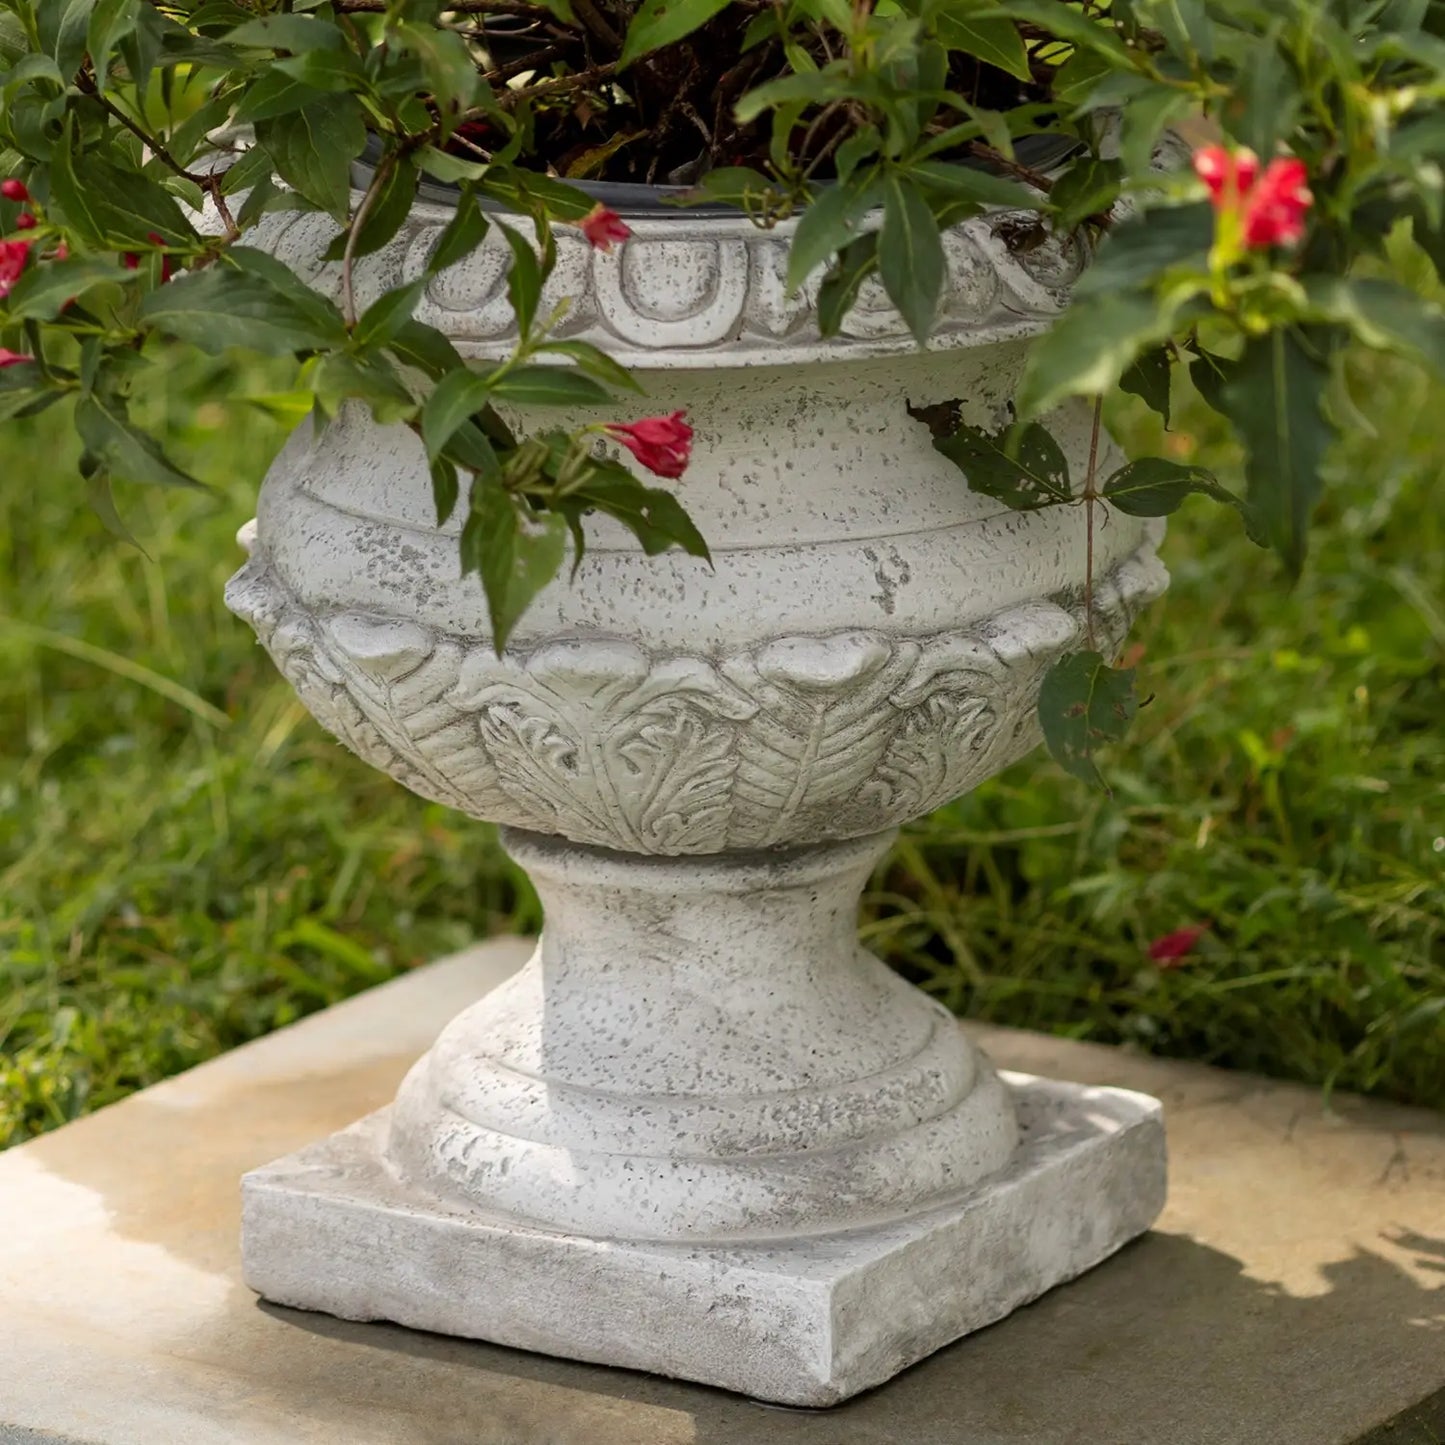 17" Tall Urn Style Flower Planter in Antique White